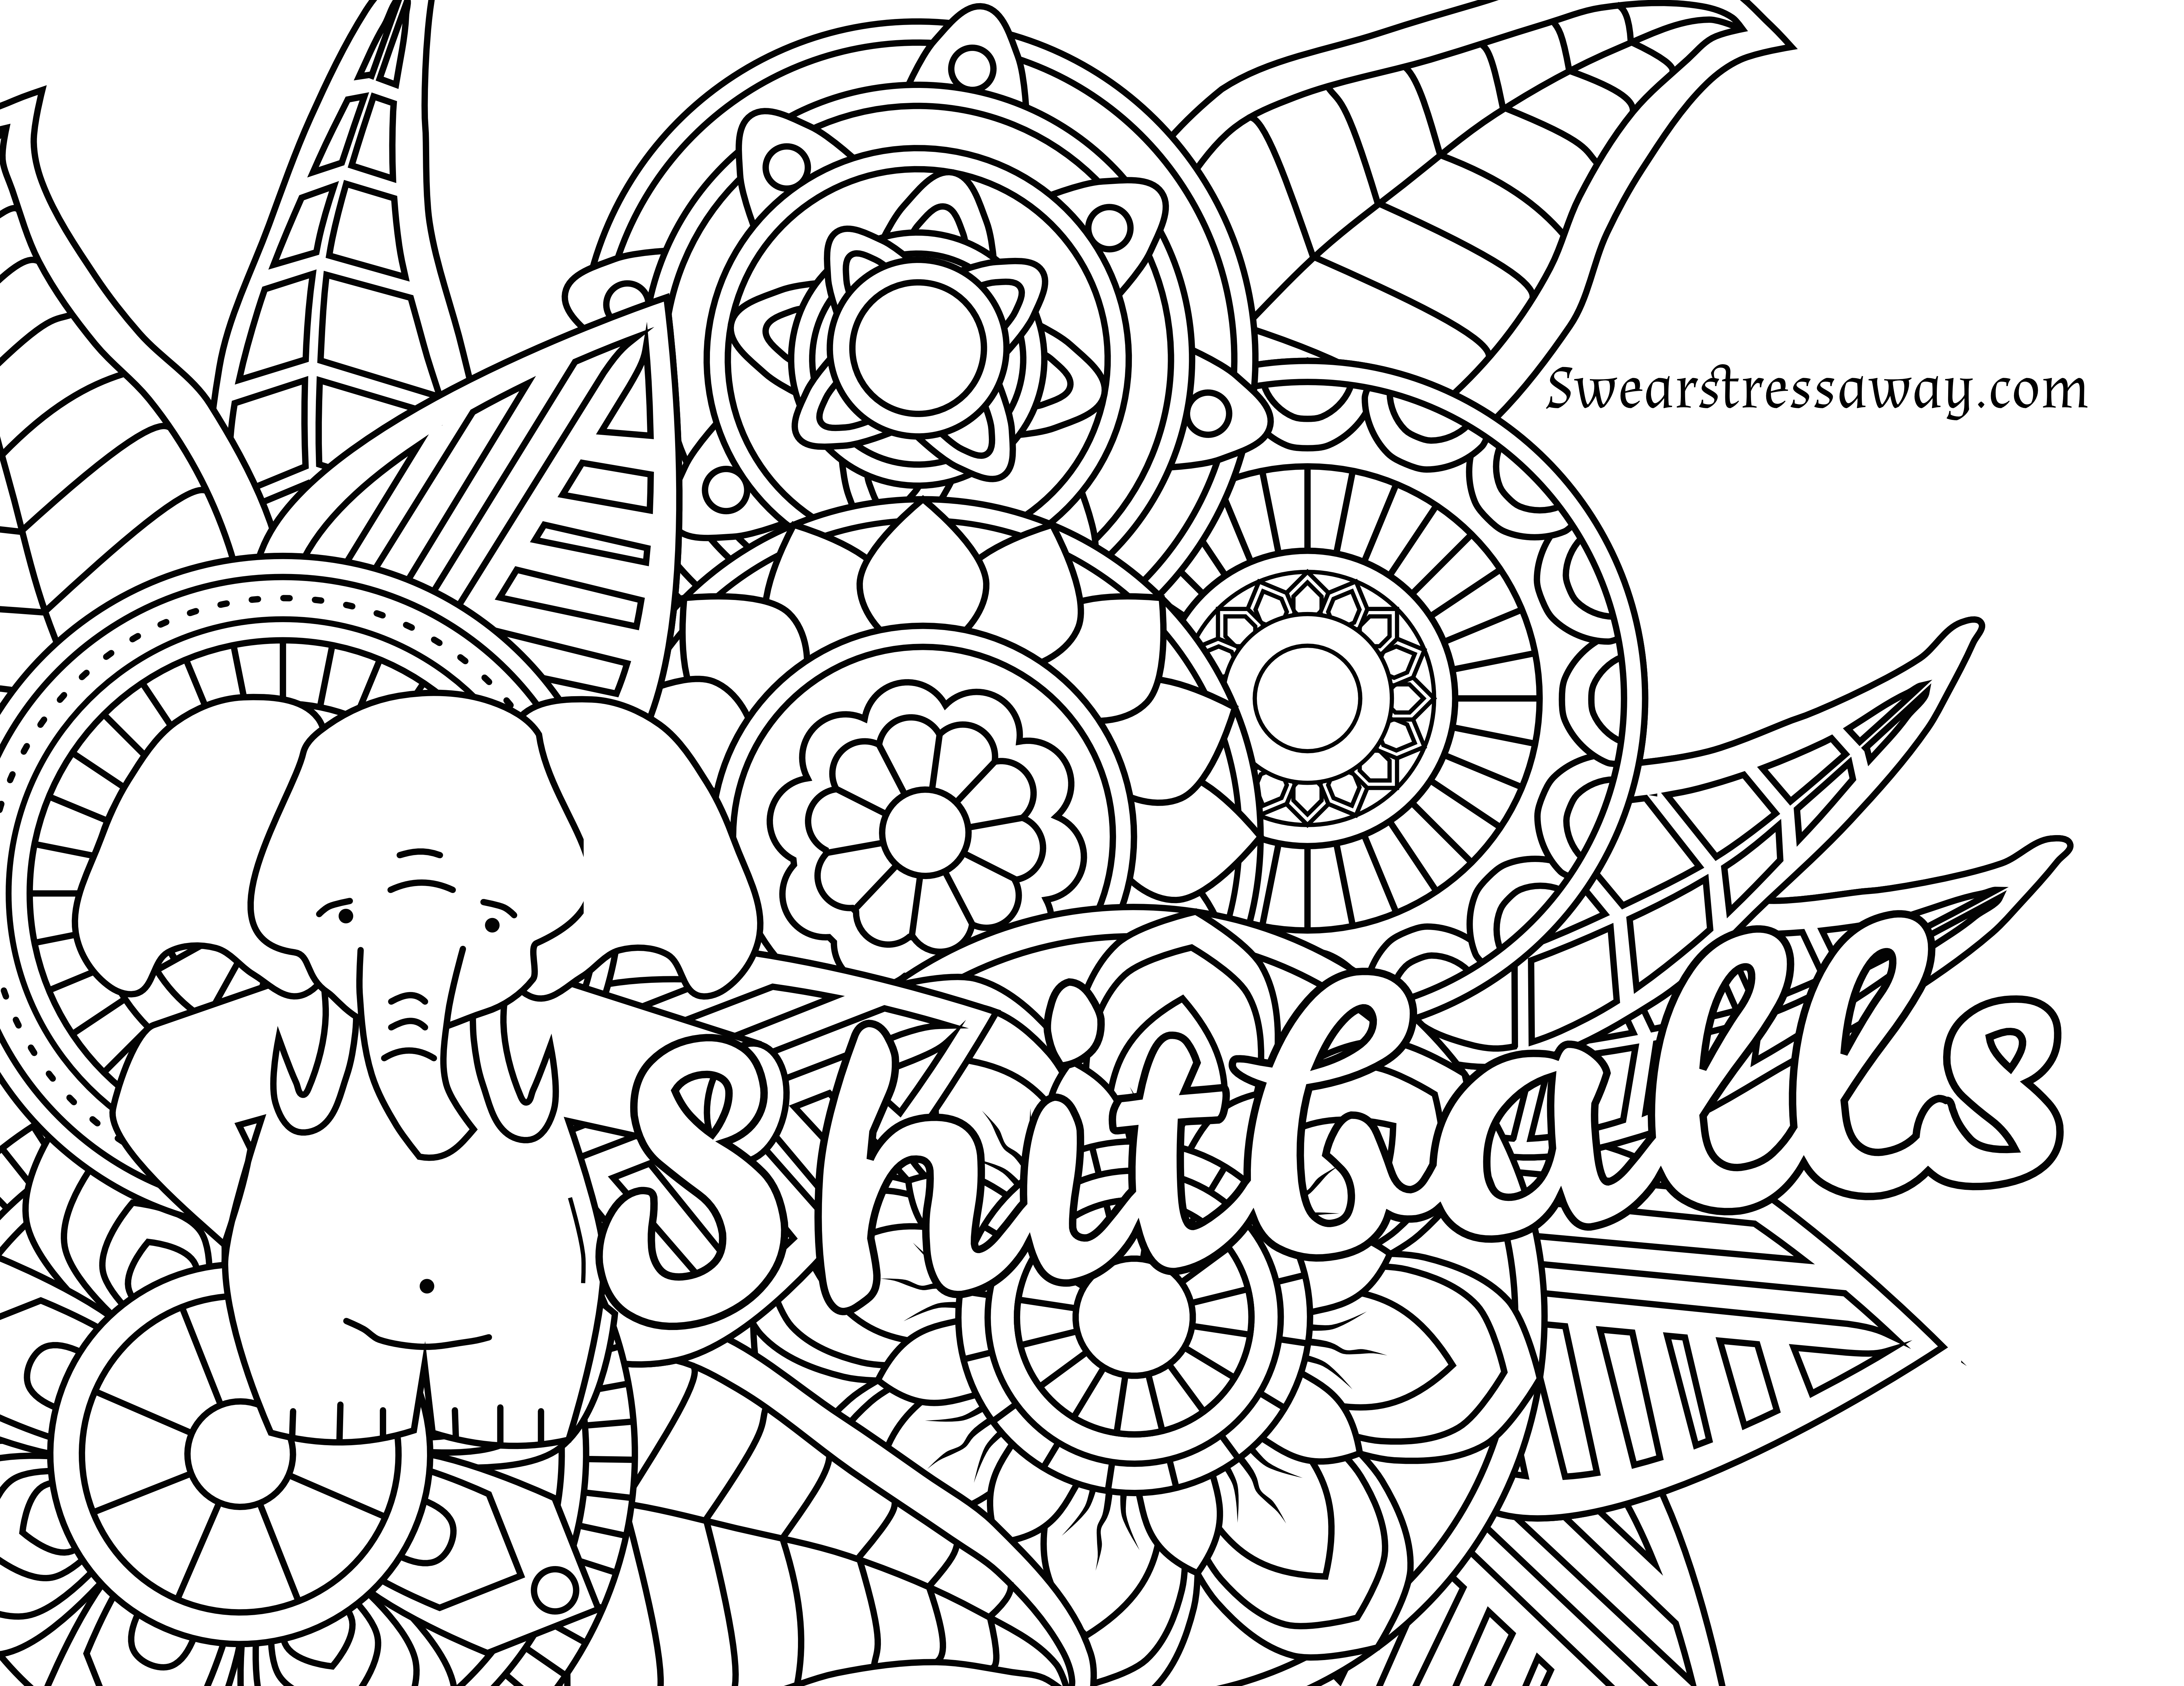 Coloring Pages : Free Printable Coloring Pages Adults Quotes For - Free Printable Coloring Books For Adults